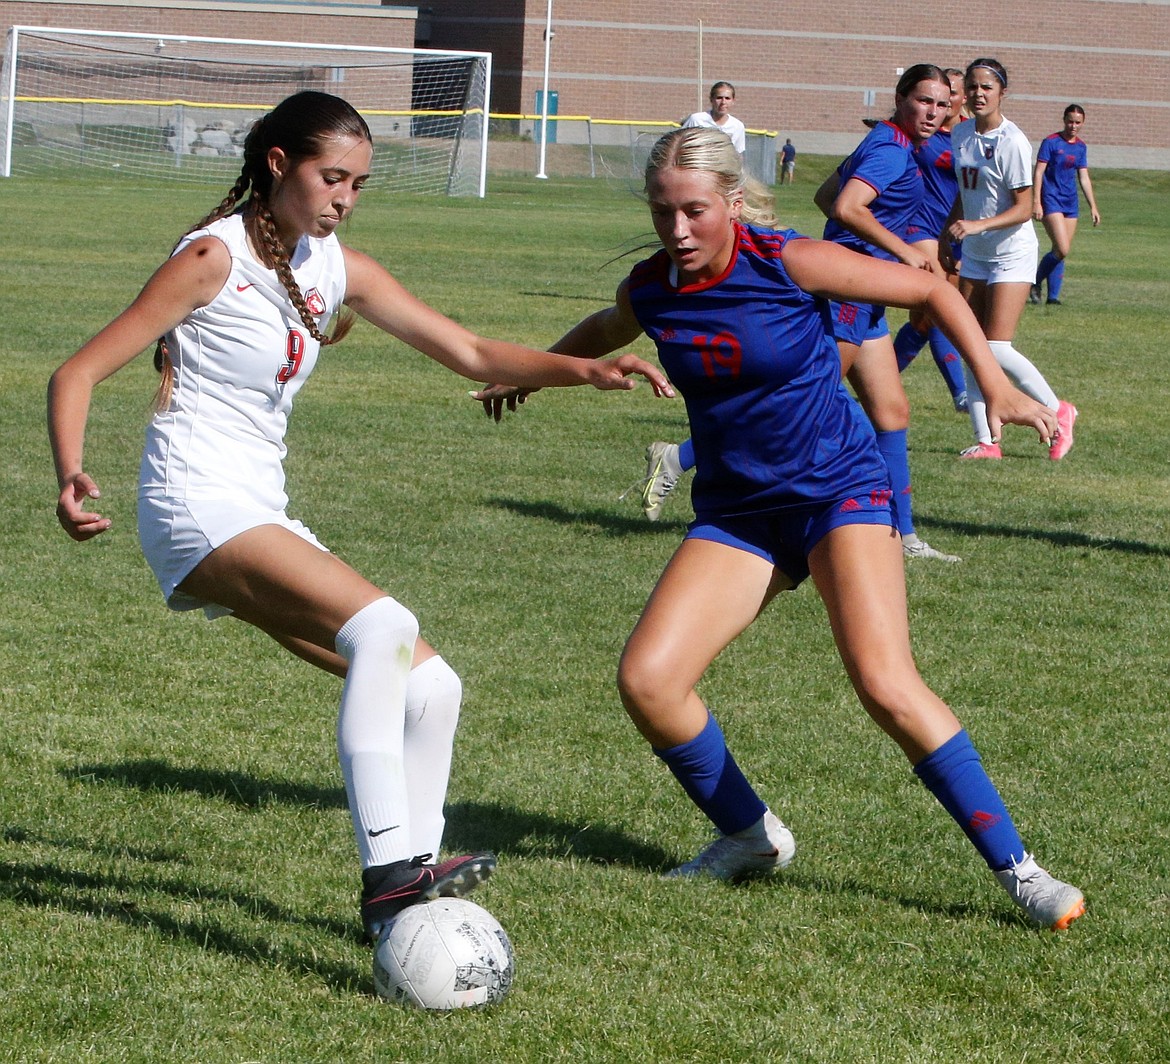 Sandpoint sophomore defender Ava Glahe dribbles past the defense of Coeur d'Alene junior defender Kaylie Smart during the first half of a scrimmage at Lake City High last week.